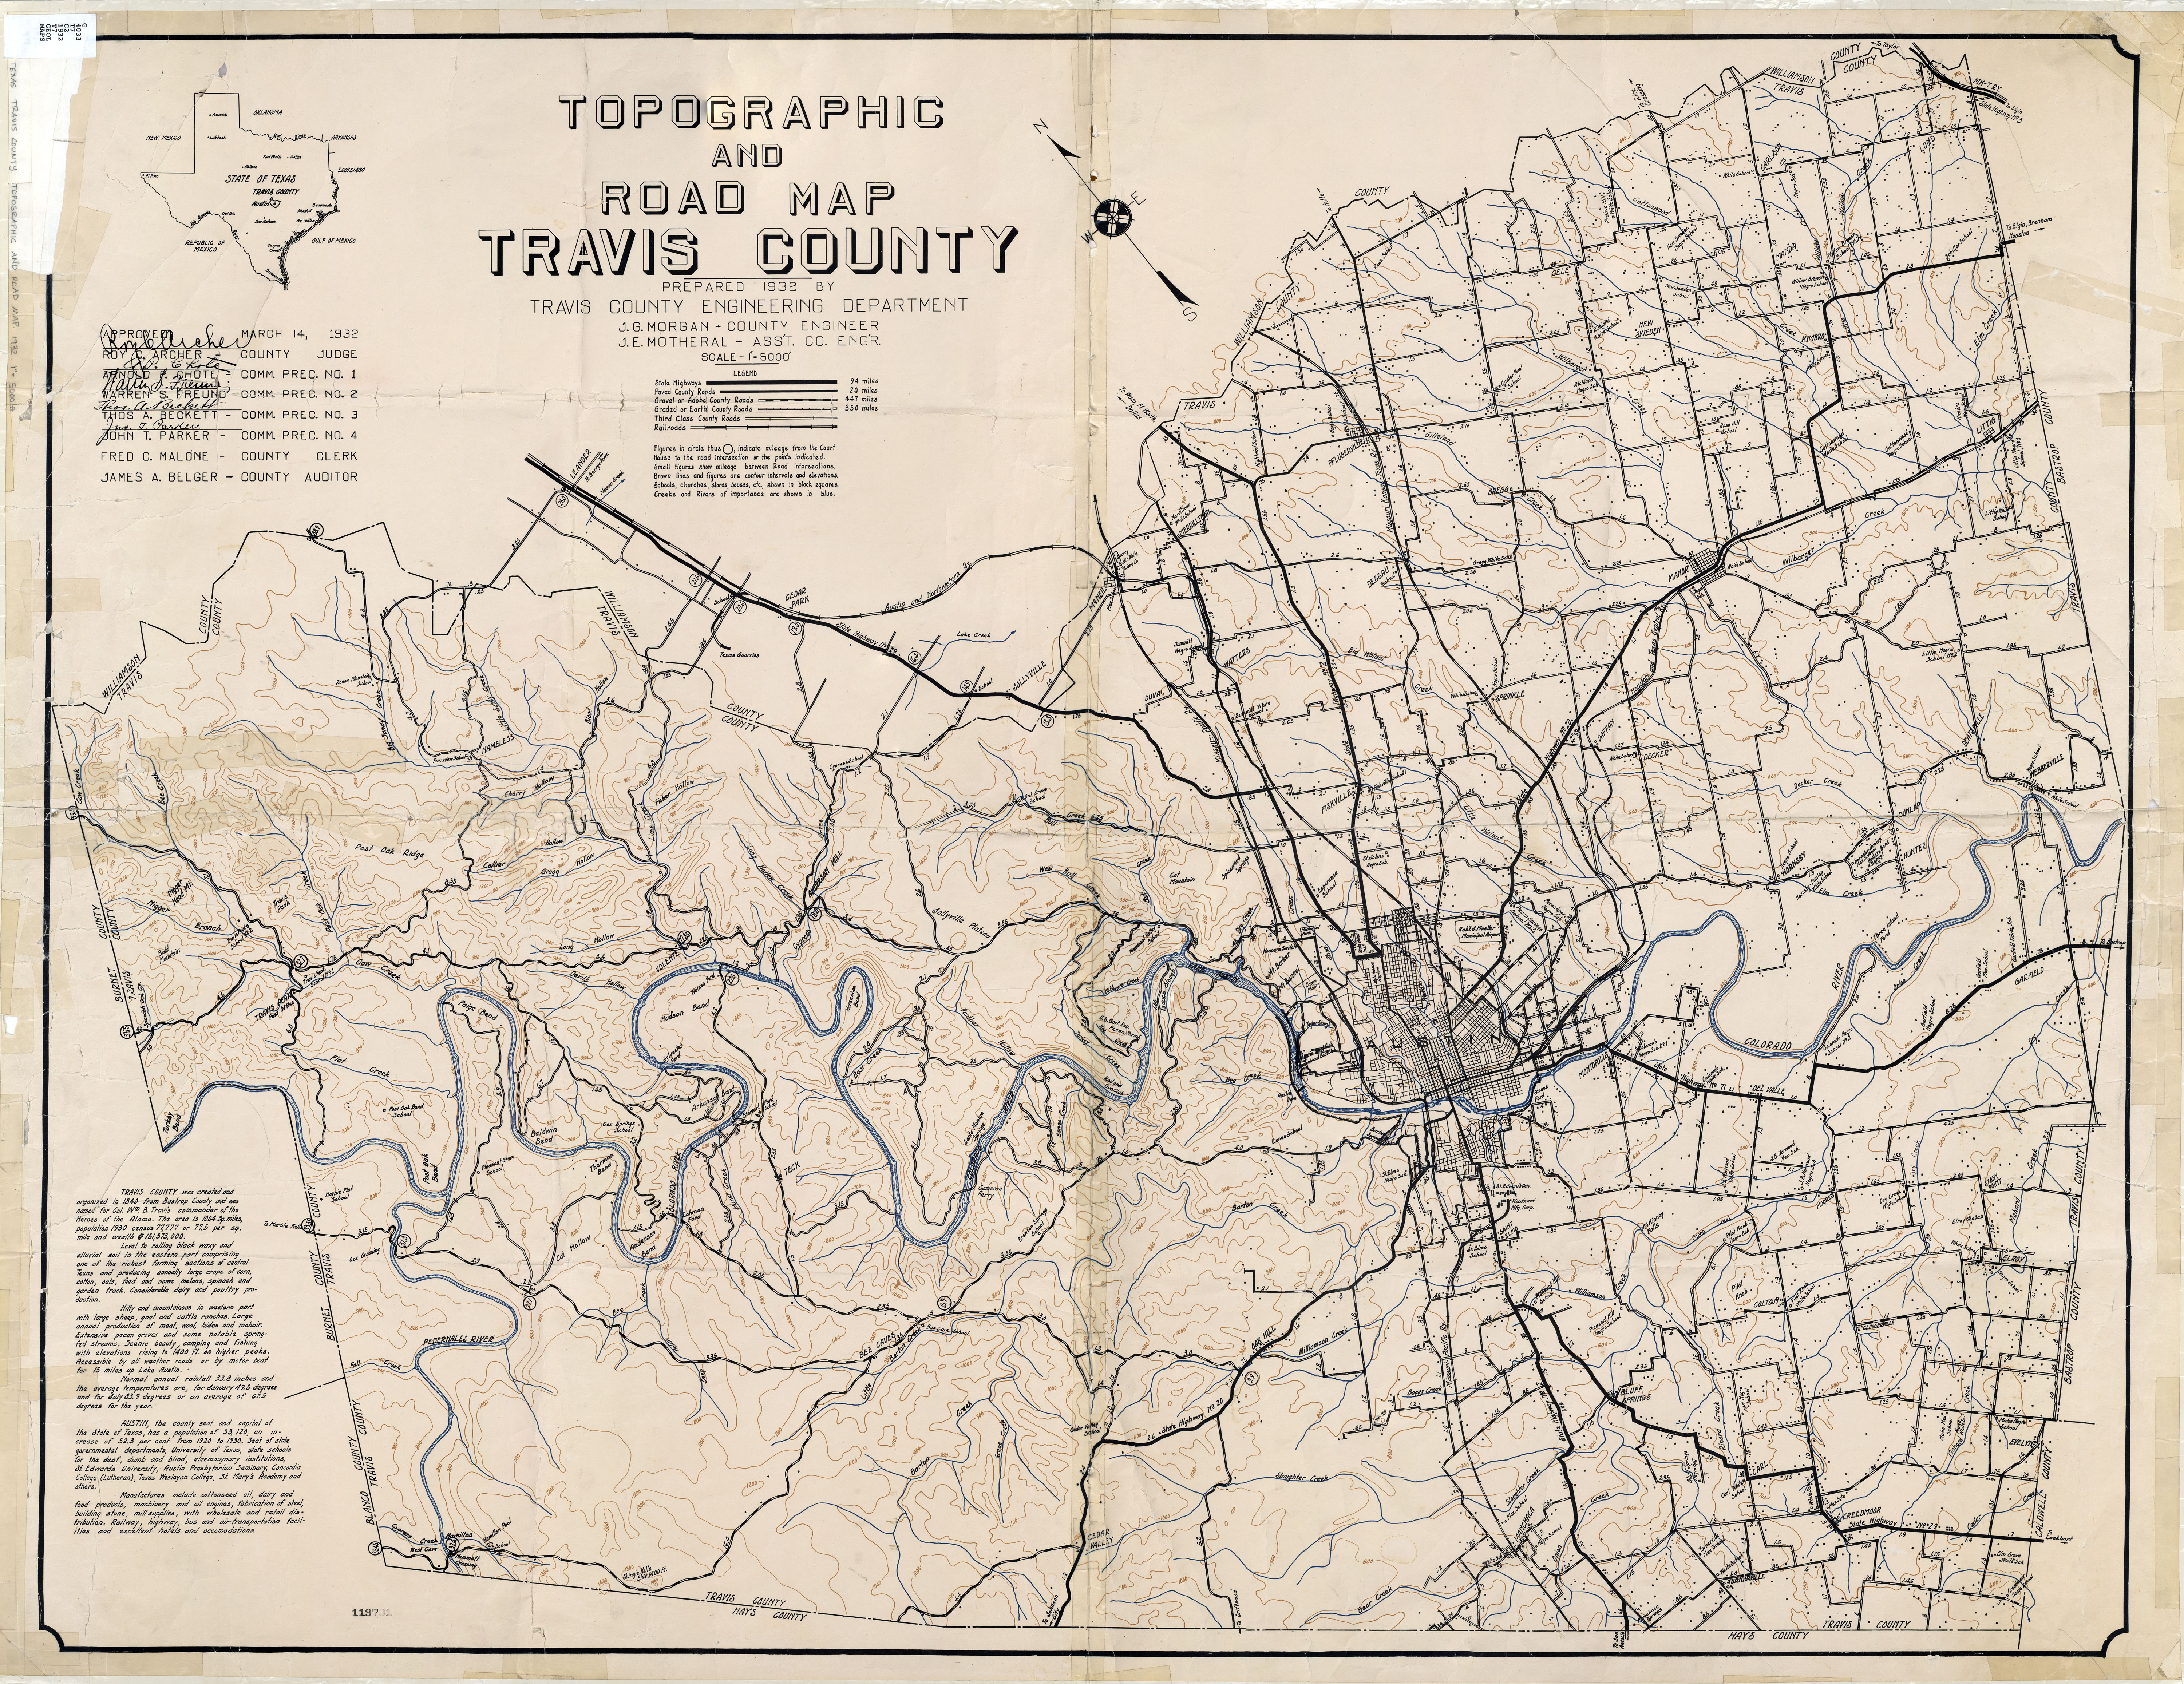 Texas Cities Historical Maps - Perry-Castañeda Map Collection - Ut - Where Is Marble Falls Texas On The Map